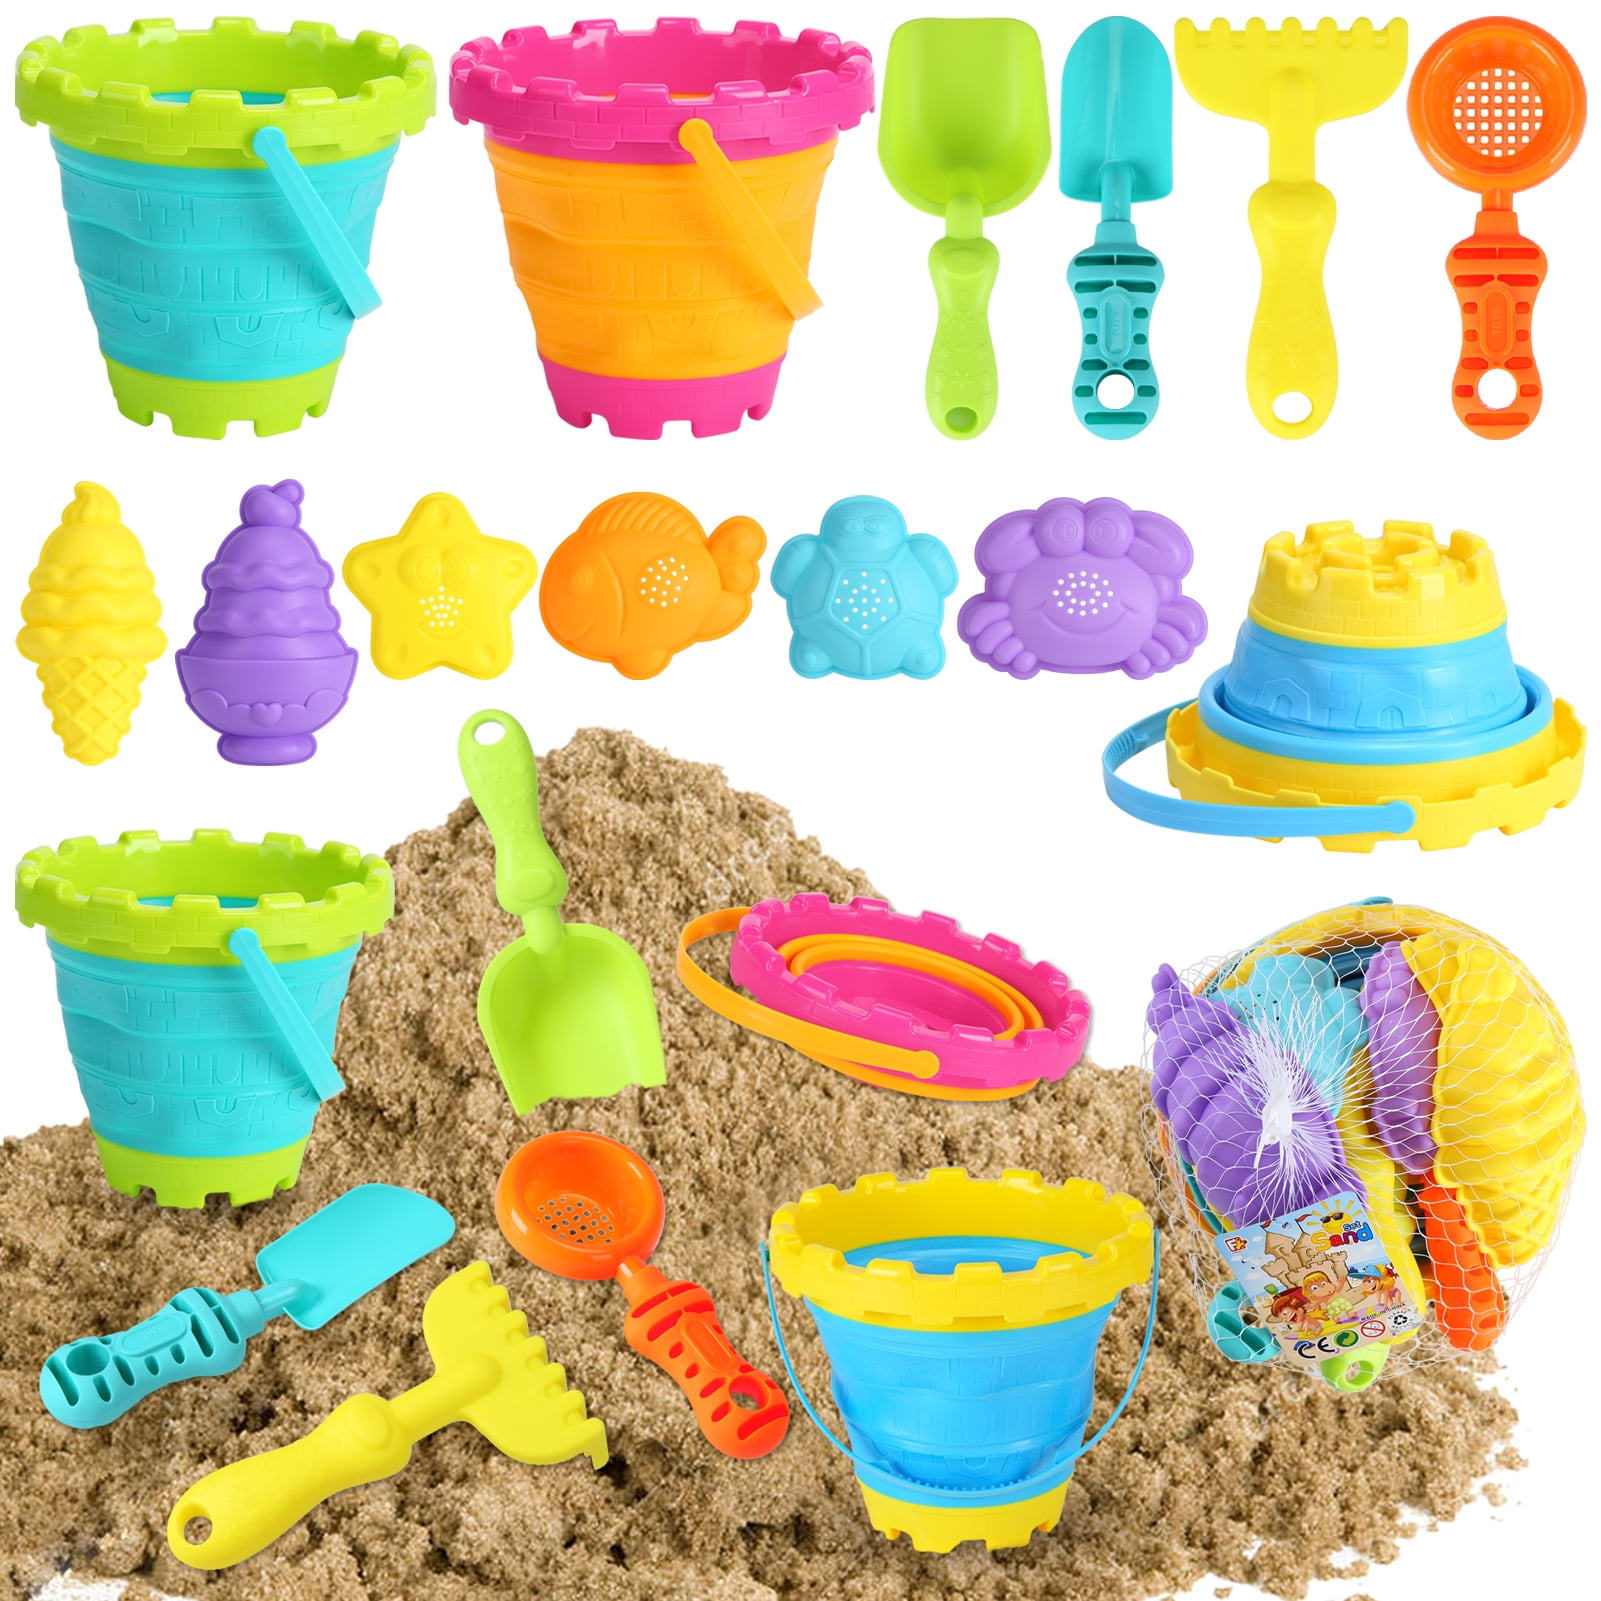 Beach Sand Toys Set for Kids, Silicone Collapsible Foldable Beach Bucket  Travel Beach Toys for Summer Outdoor Camping and Fishing Tub with Sand Mold  Shovels Rakes for Toddlers Boys Girls 2.5L 3PCS